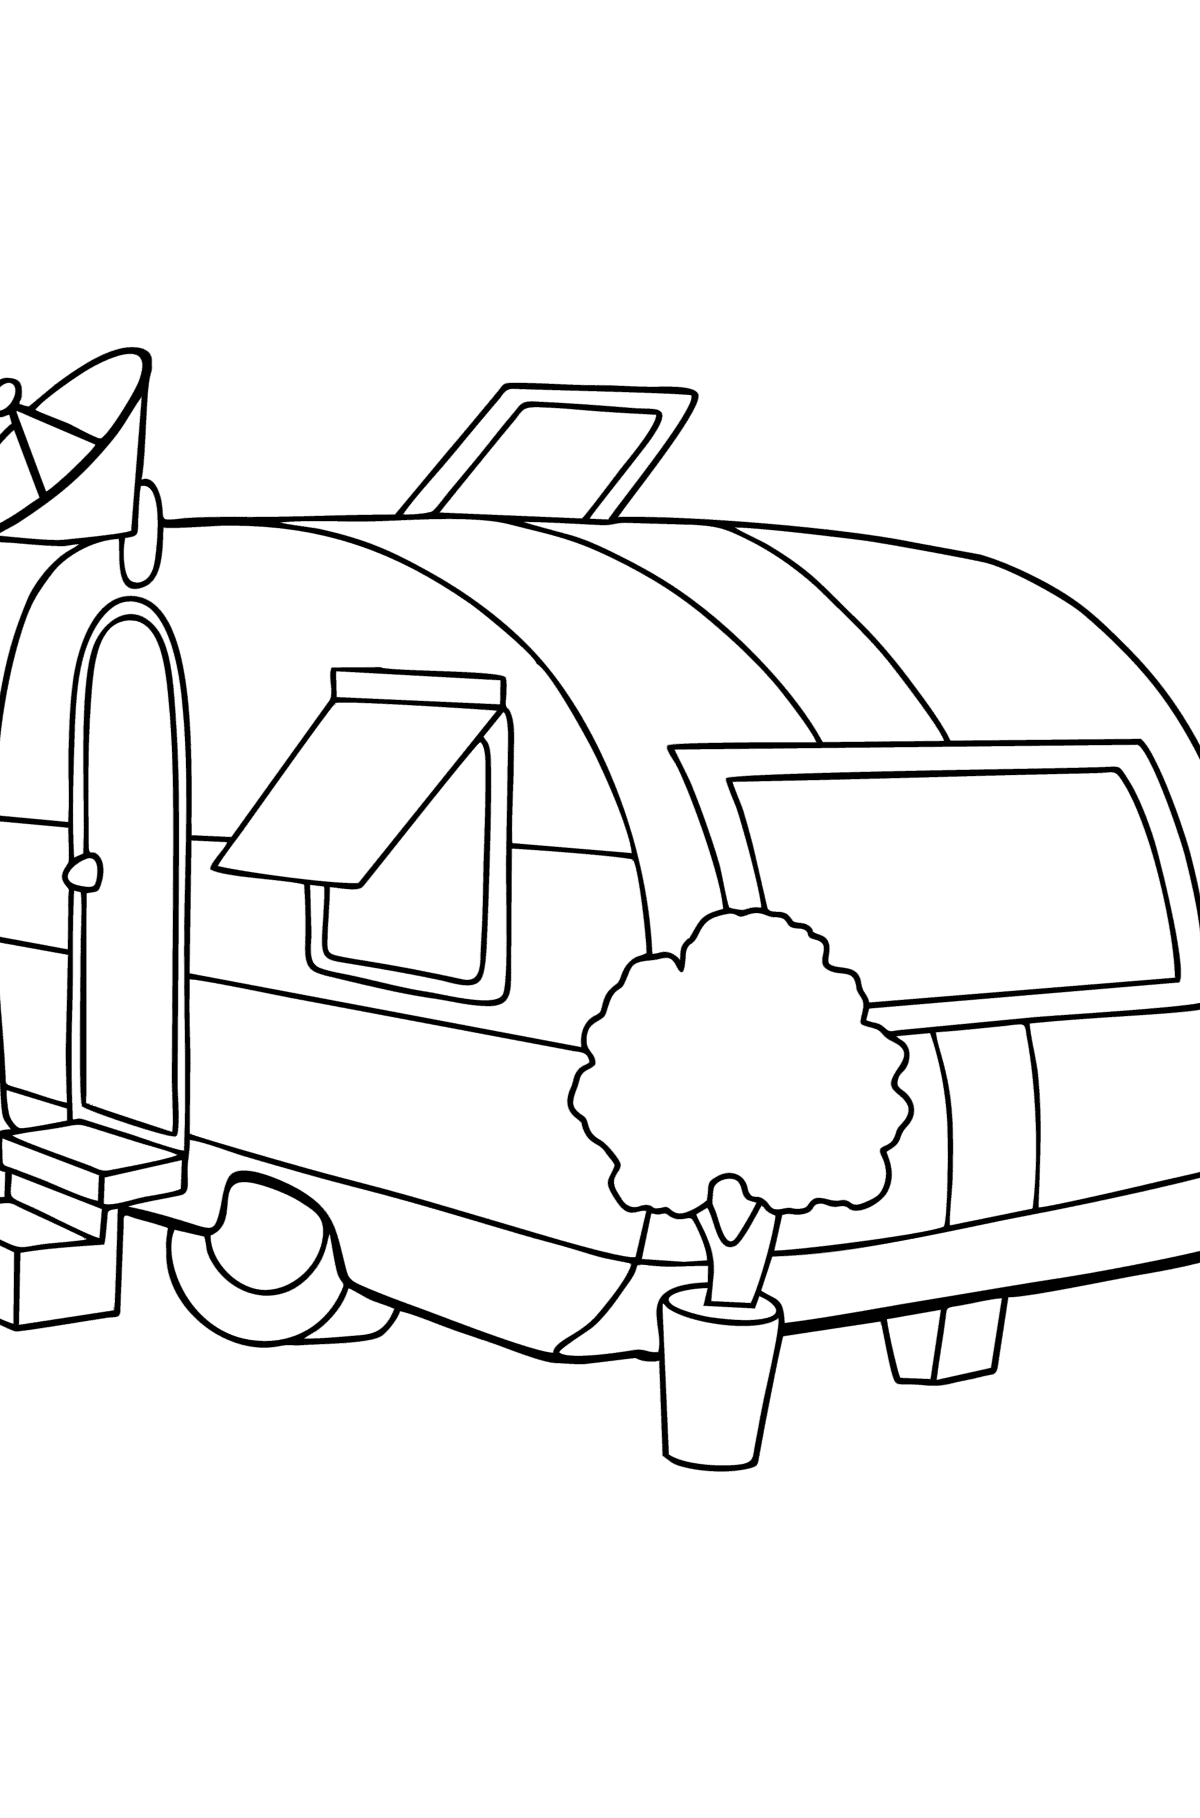 Camper Coloring Page - Coloring Pages for Kids